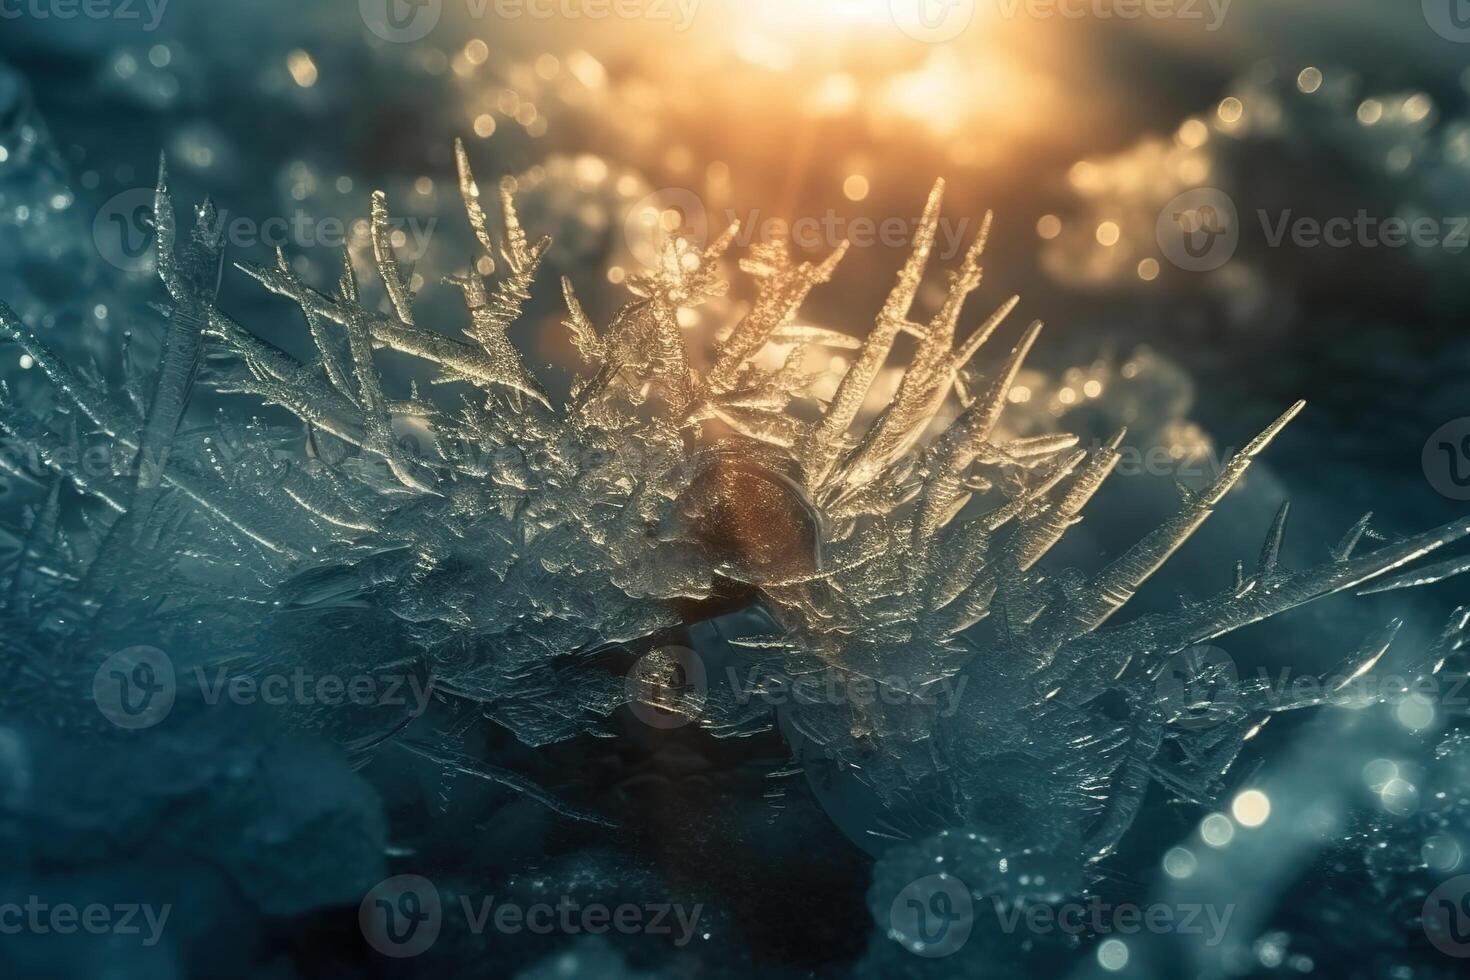 Frozen Nature Ice Detailed Texture Sun Light Background with photo